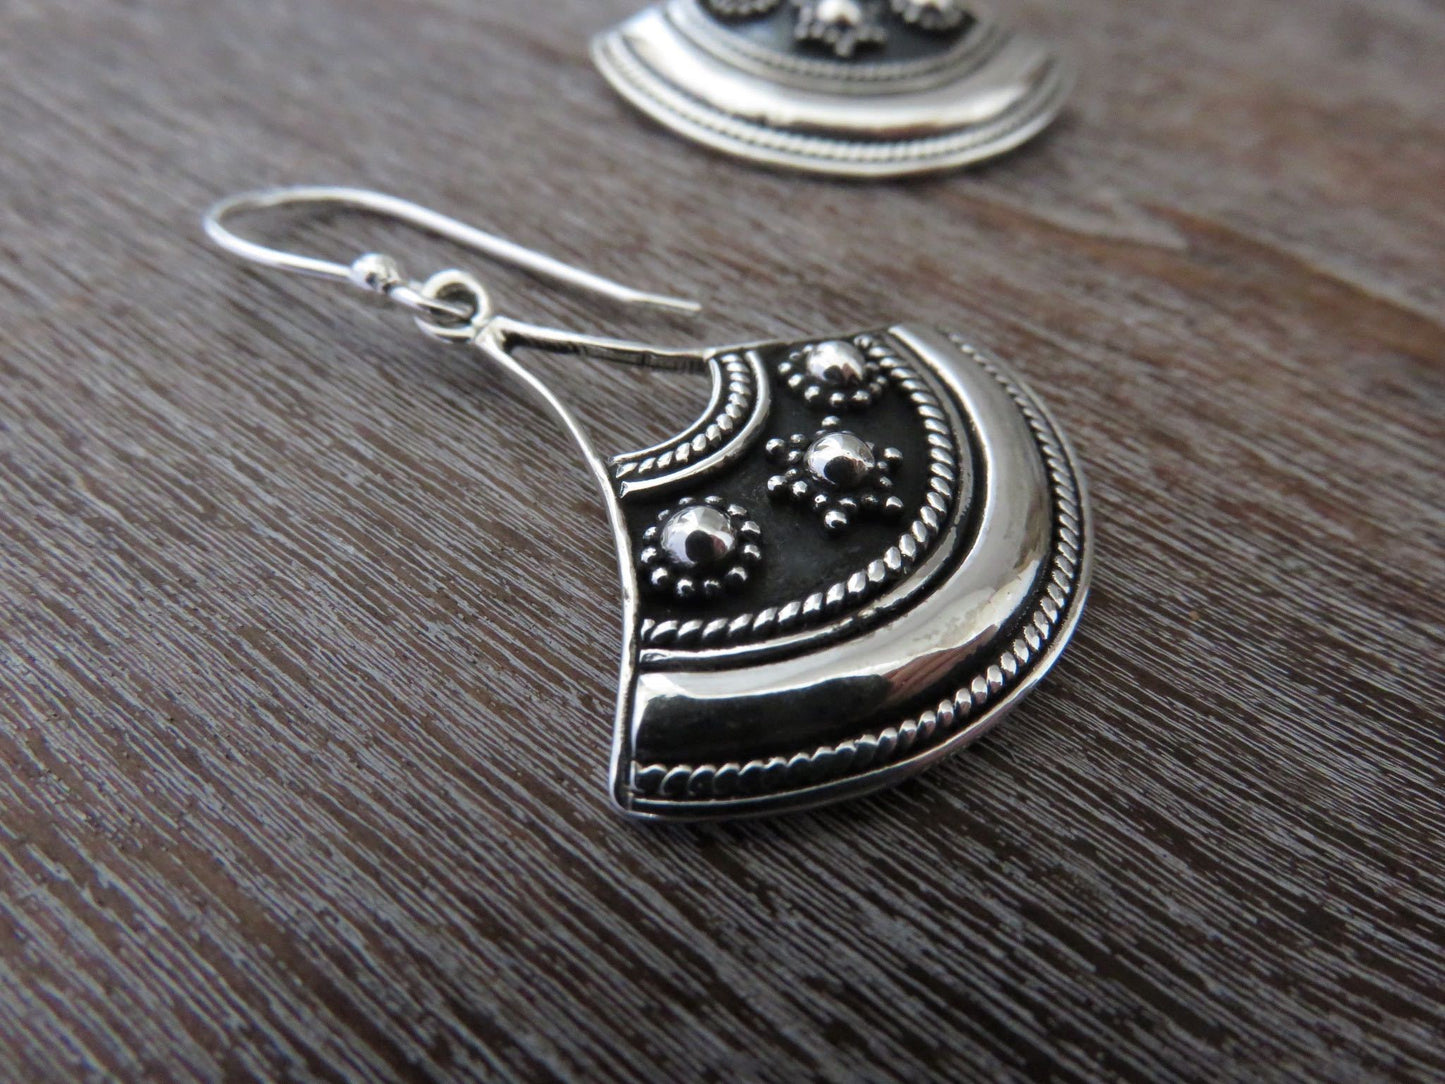 patterned earrings with dots made of silver